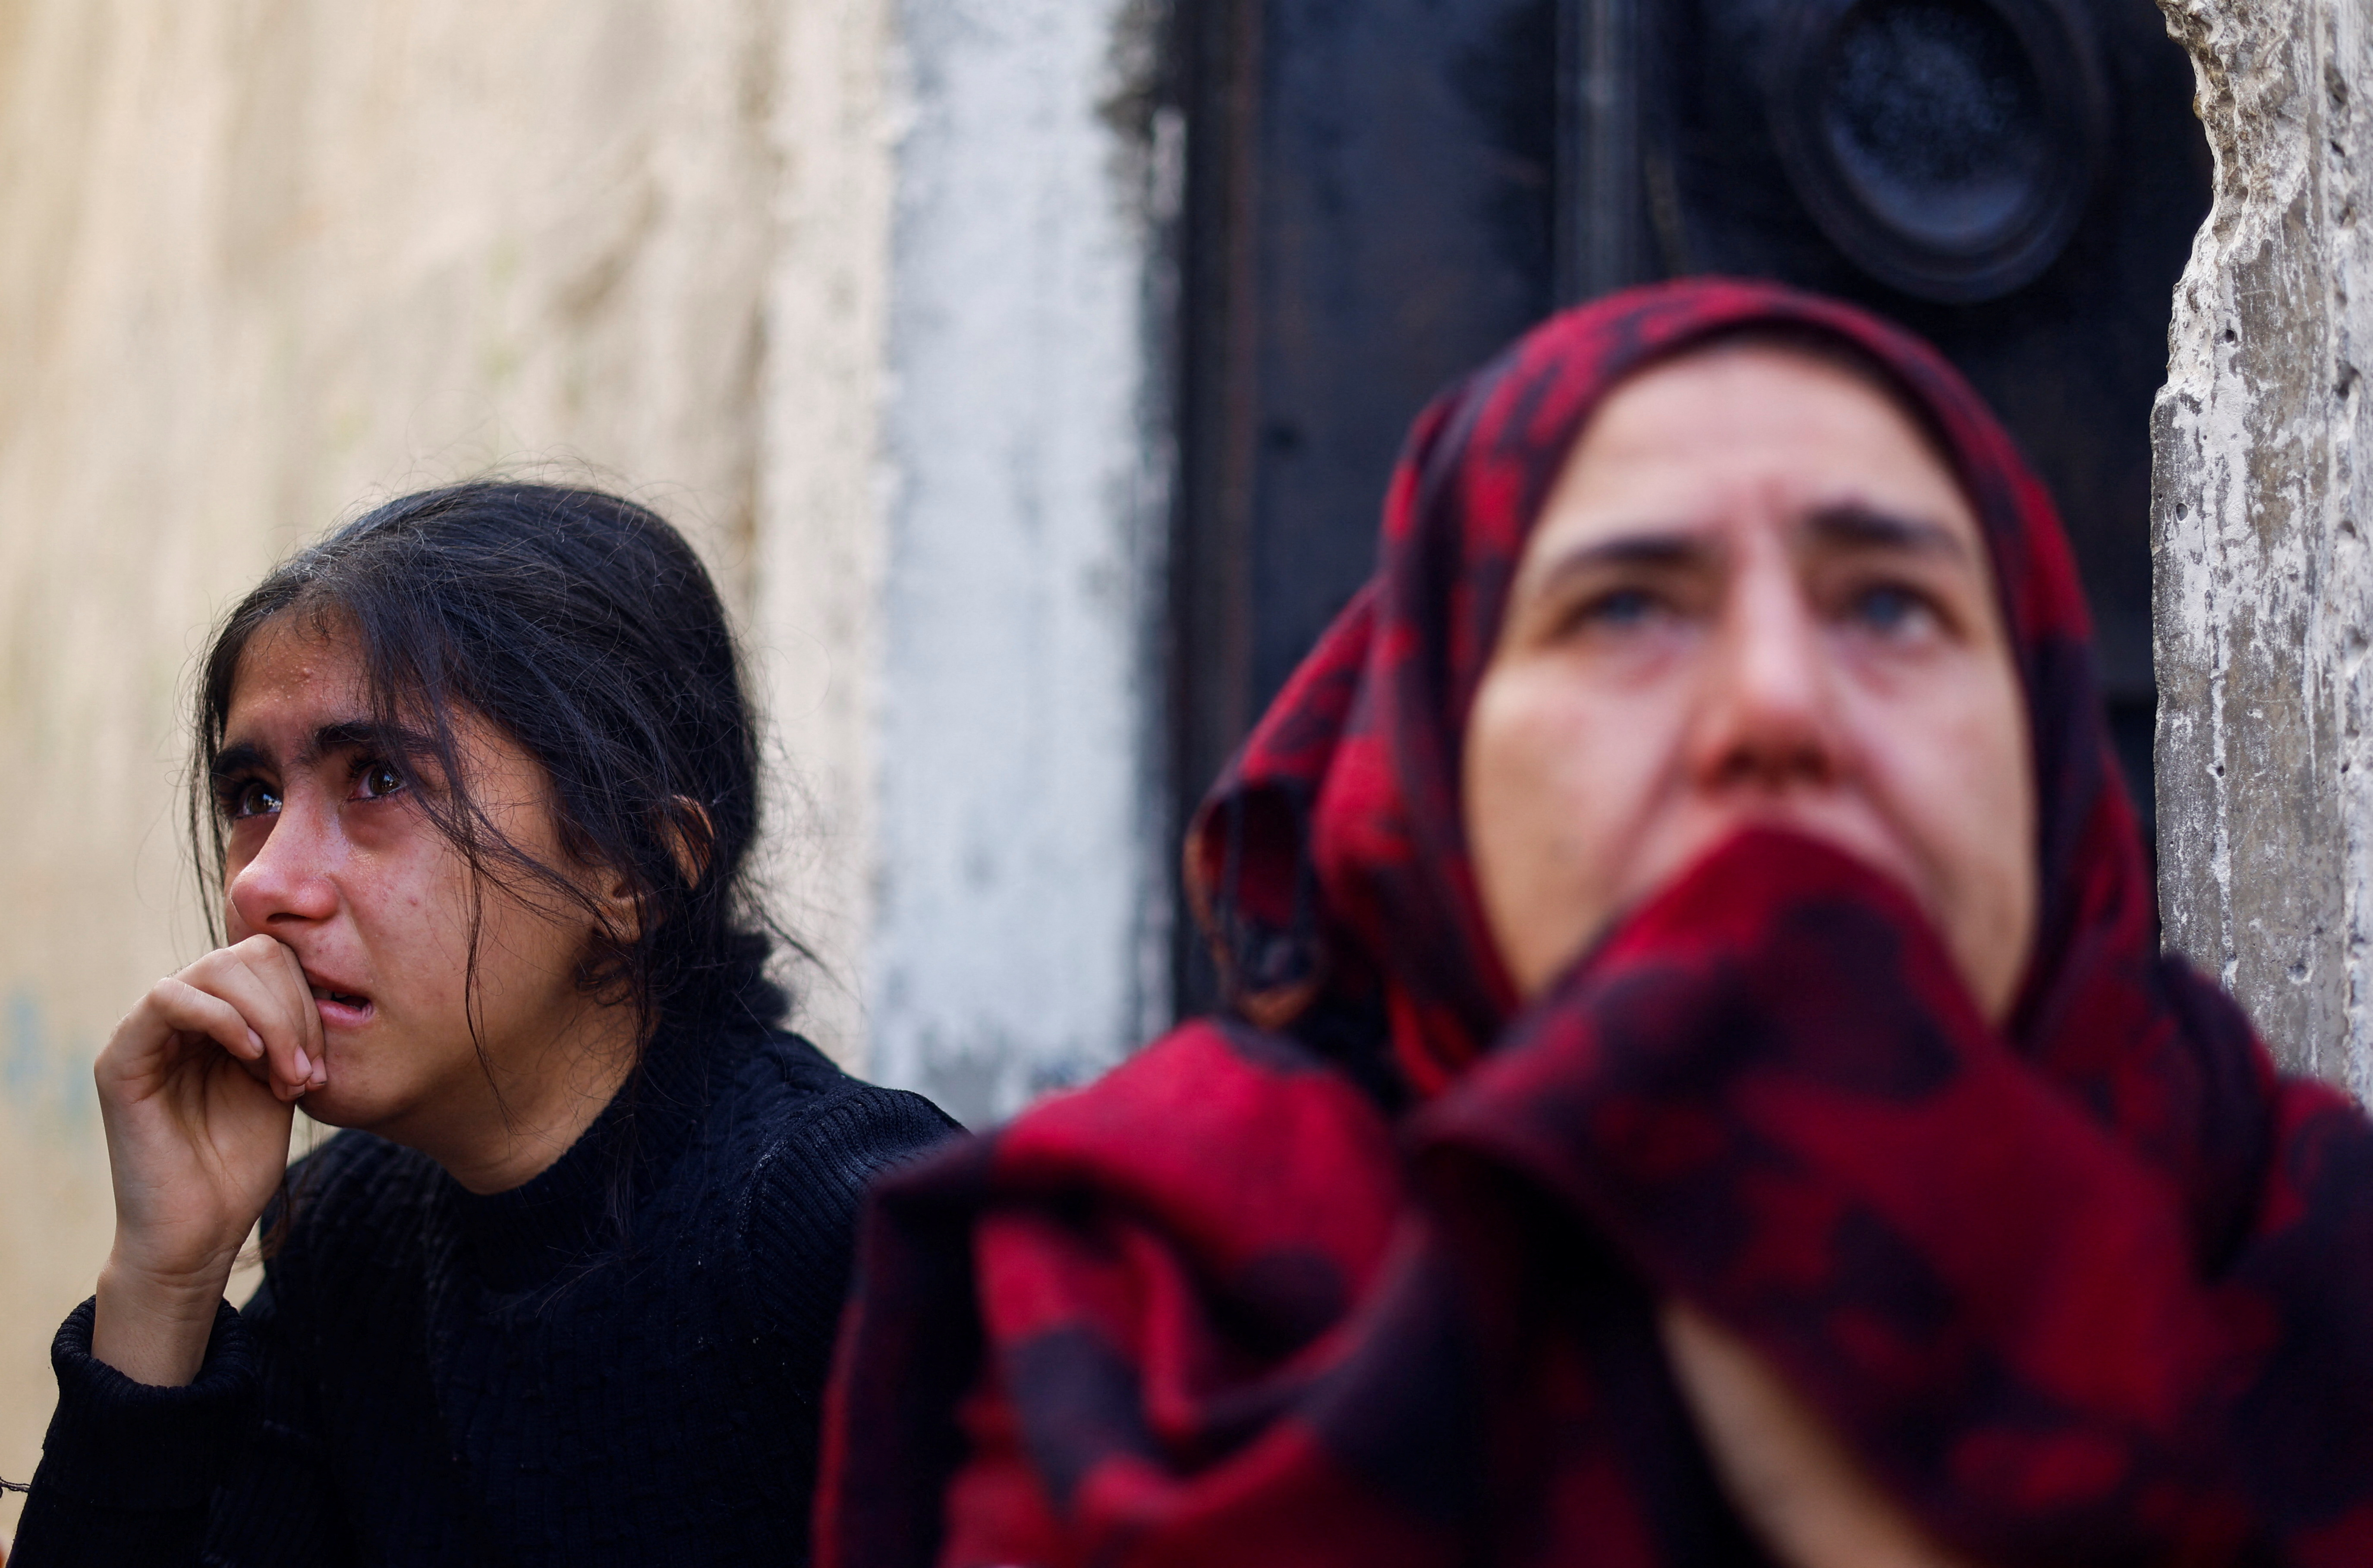 A Palestinian girl and woman react at the site of an Israeli strike on a house, after a temporary truce between Hamas and Israel expired, in Khan Younis